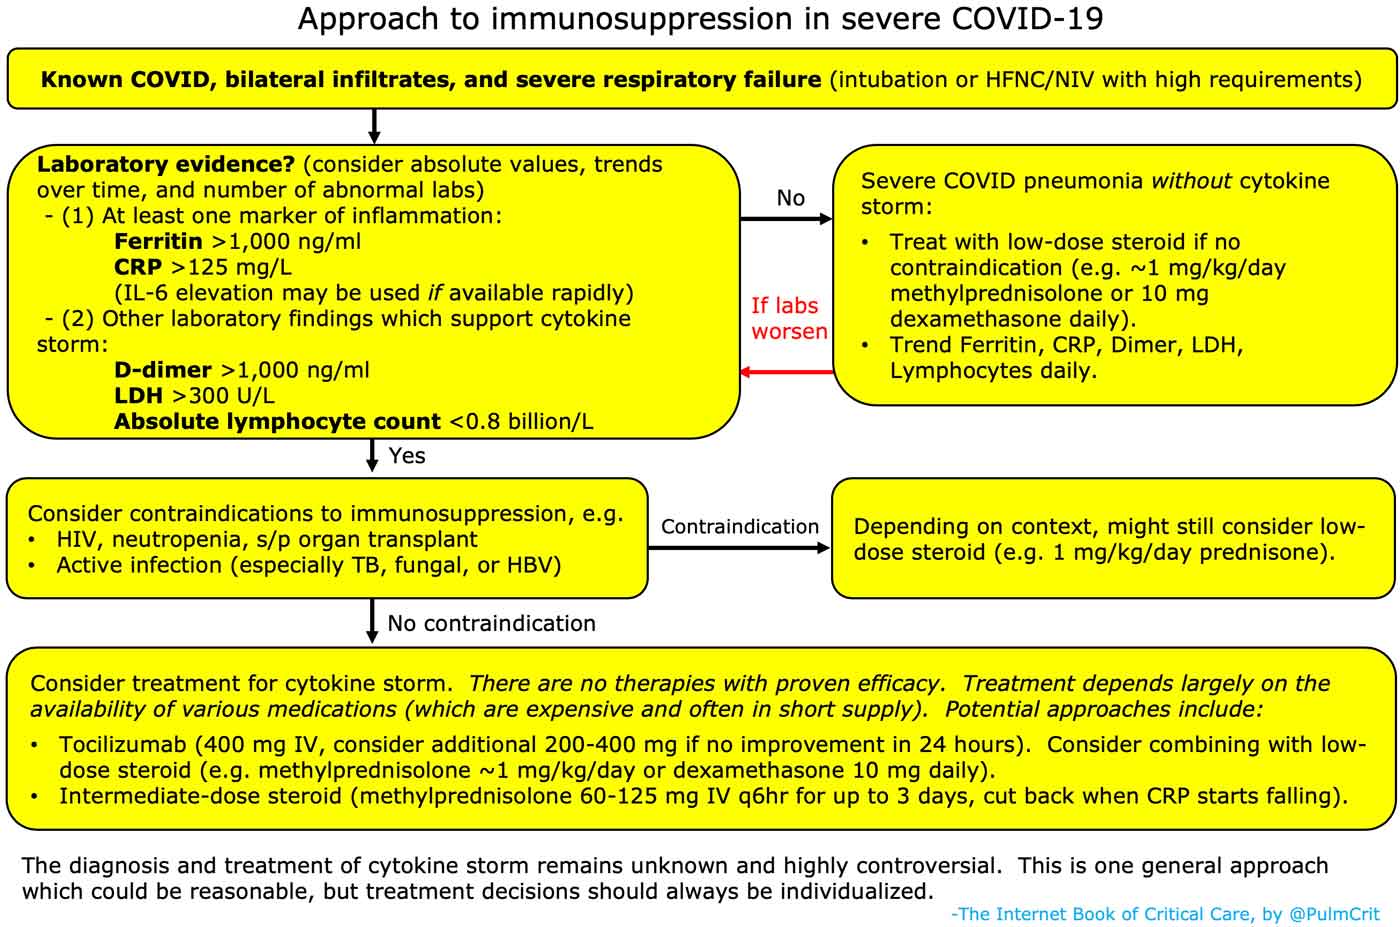 Approach to Immunosuppression in COVID-19